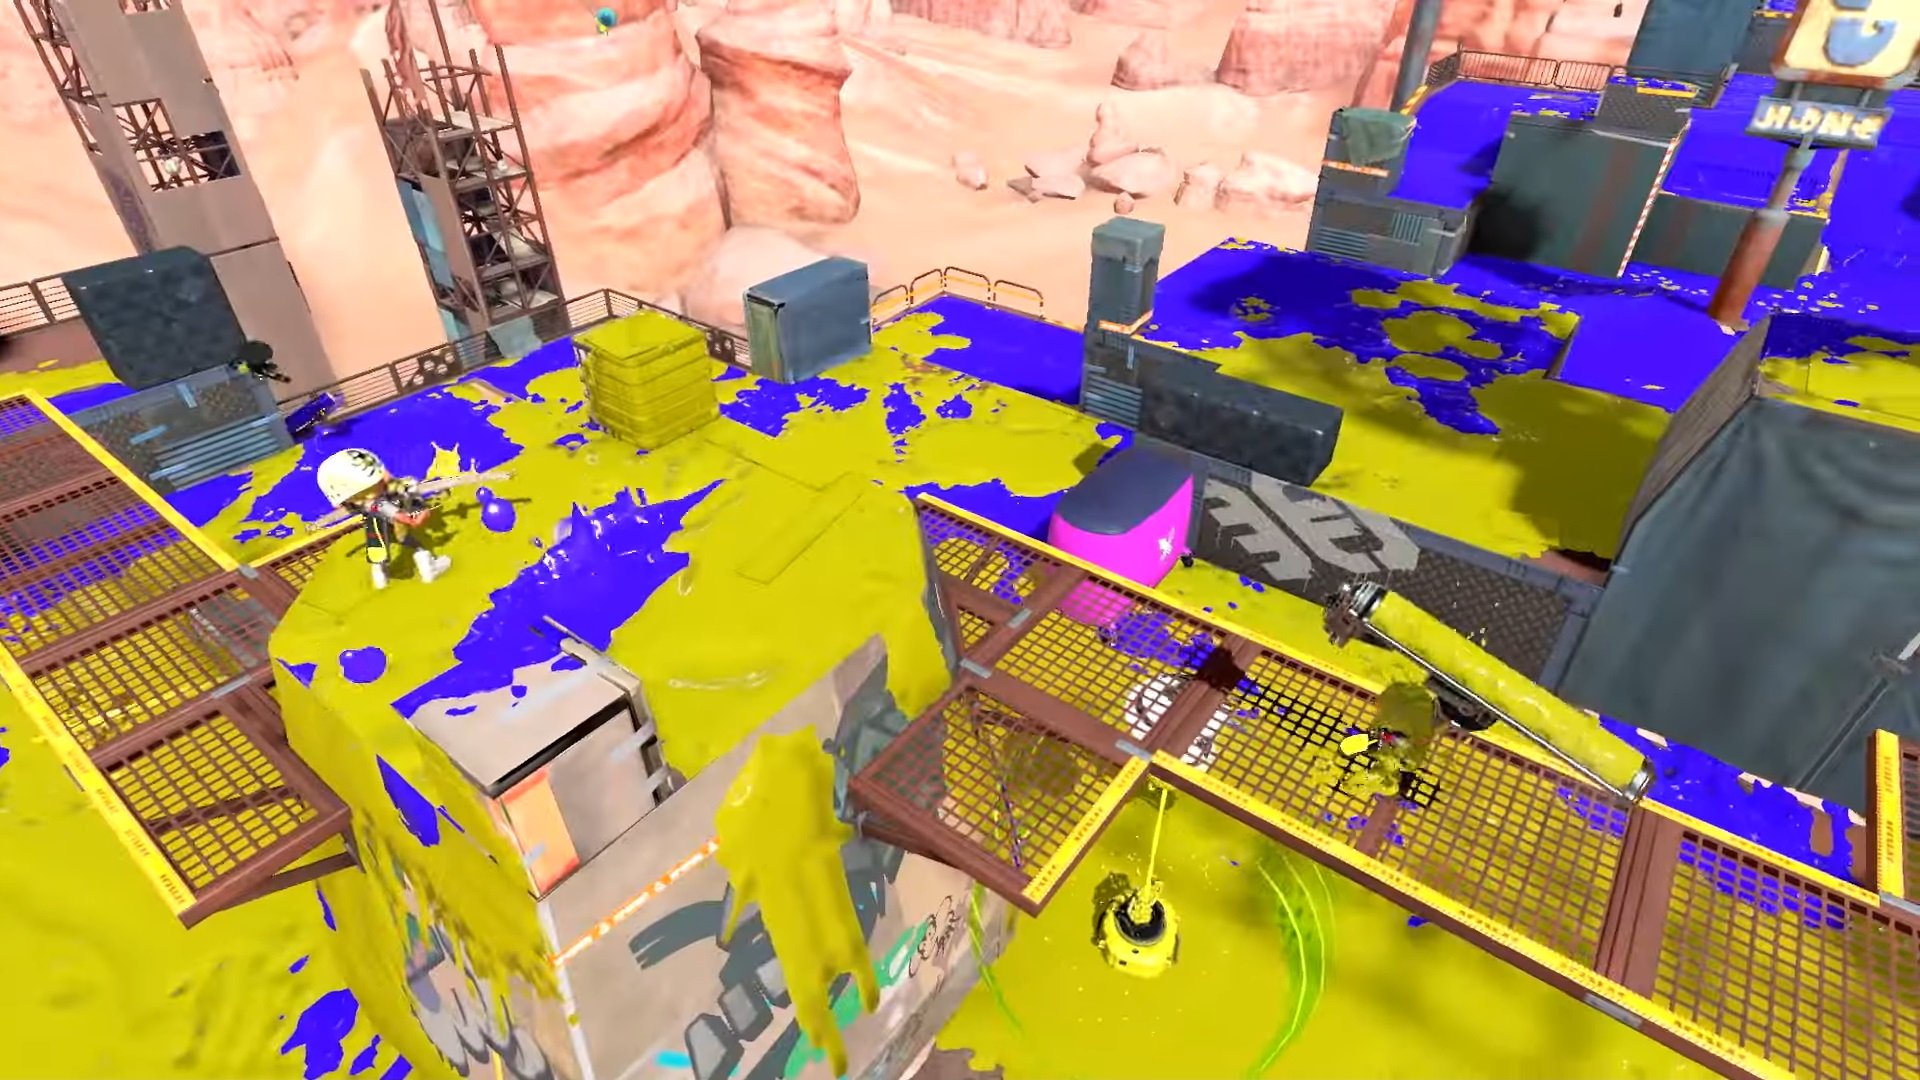 Splatoon 3 bug screenshot showing players splatting each other and the area around them with their guns.